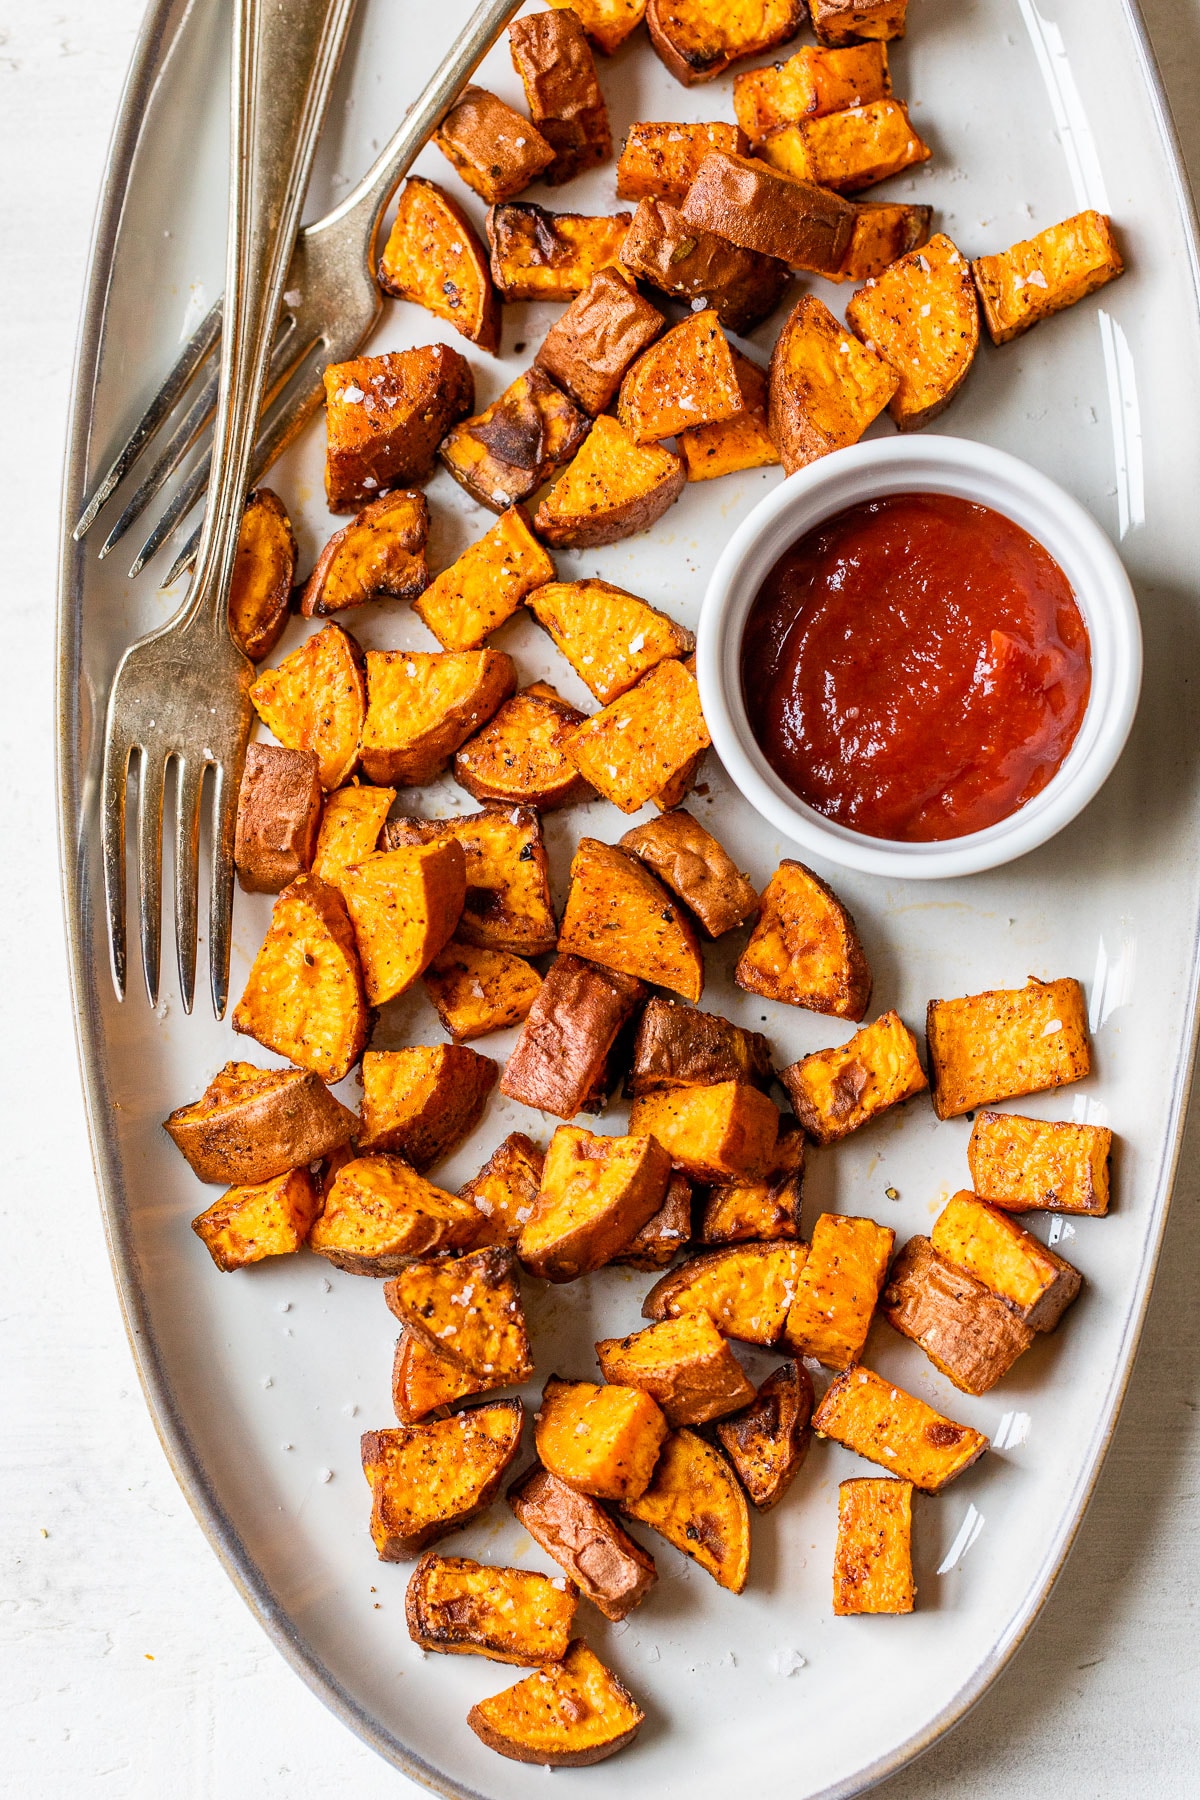 cooked sweet potatoes on a plate with a side of ketchup